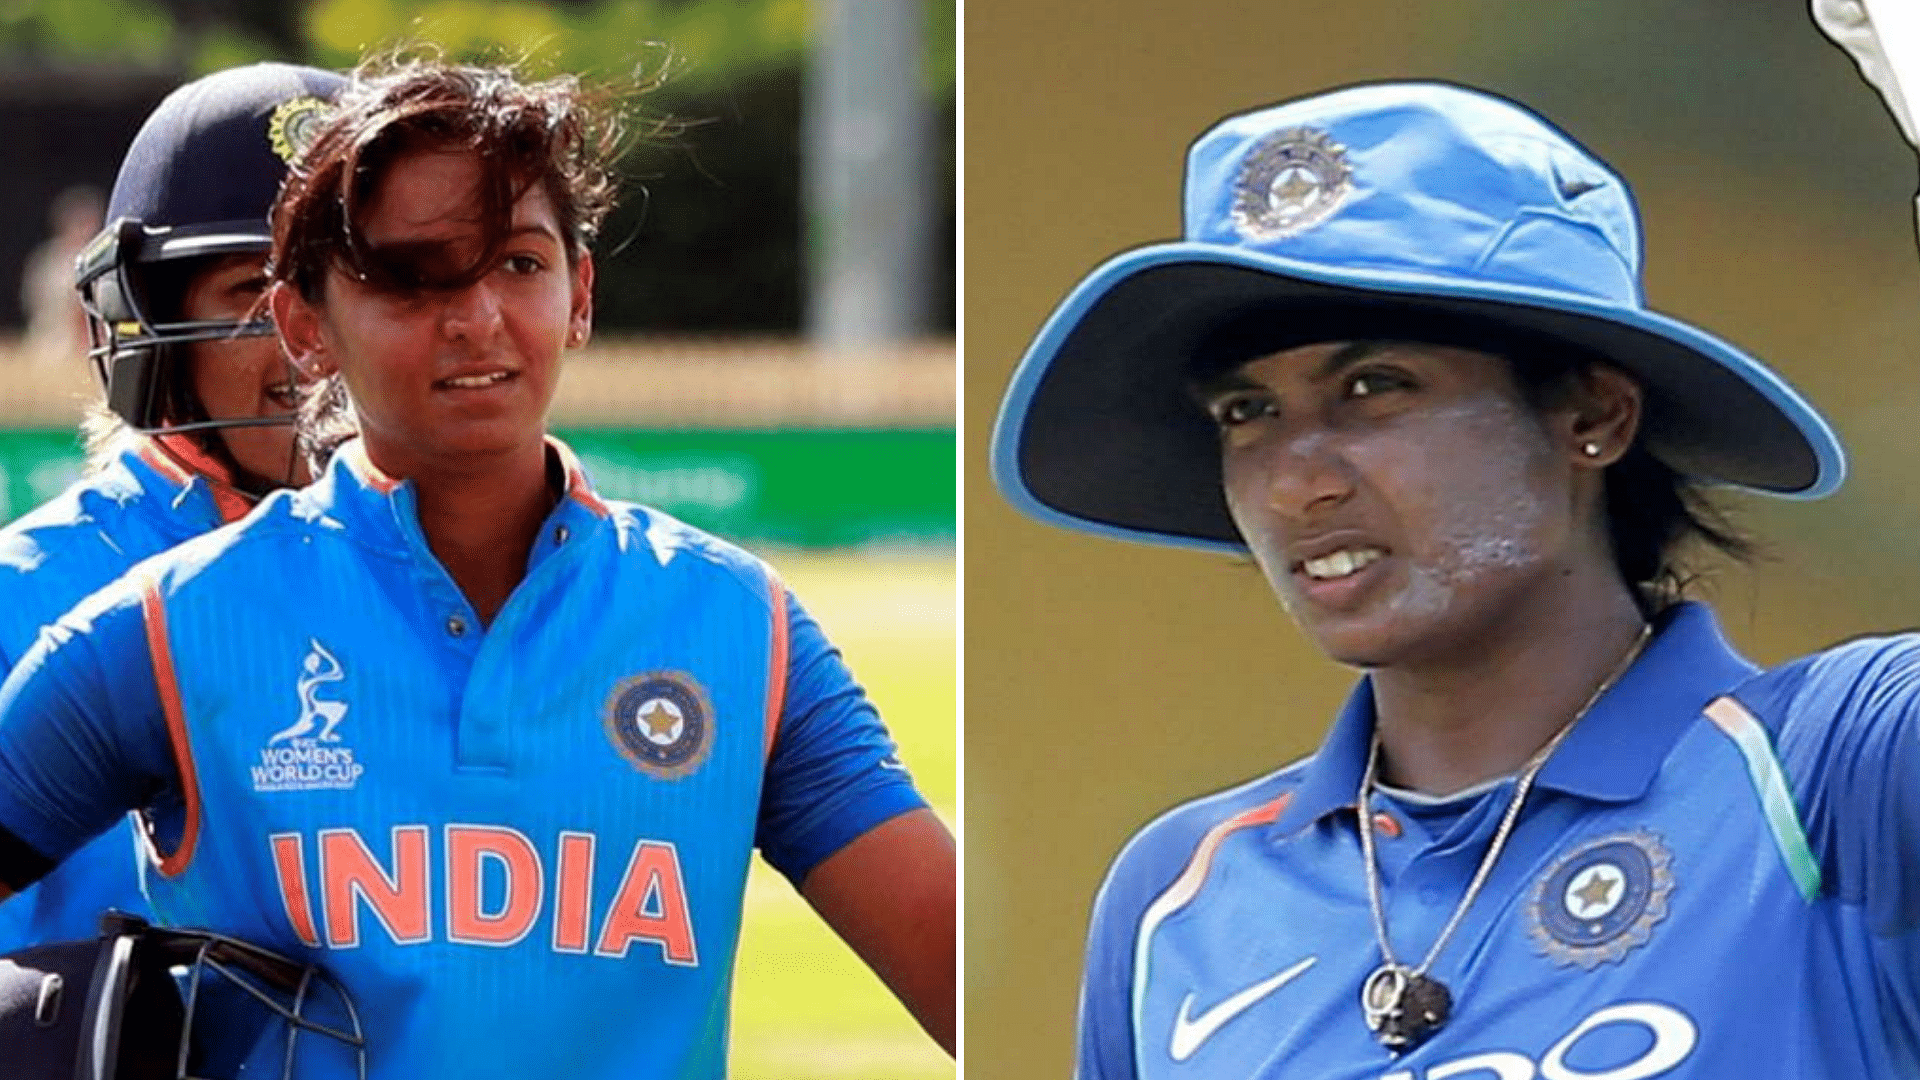 Harmanpreet Kaur was slammed for leaving Mithali Raj out of the Indian line-up in the Women’s World T20 semi-final against England.